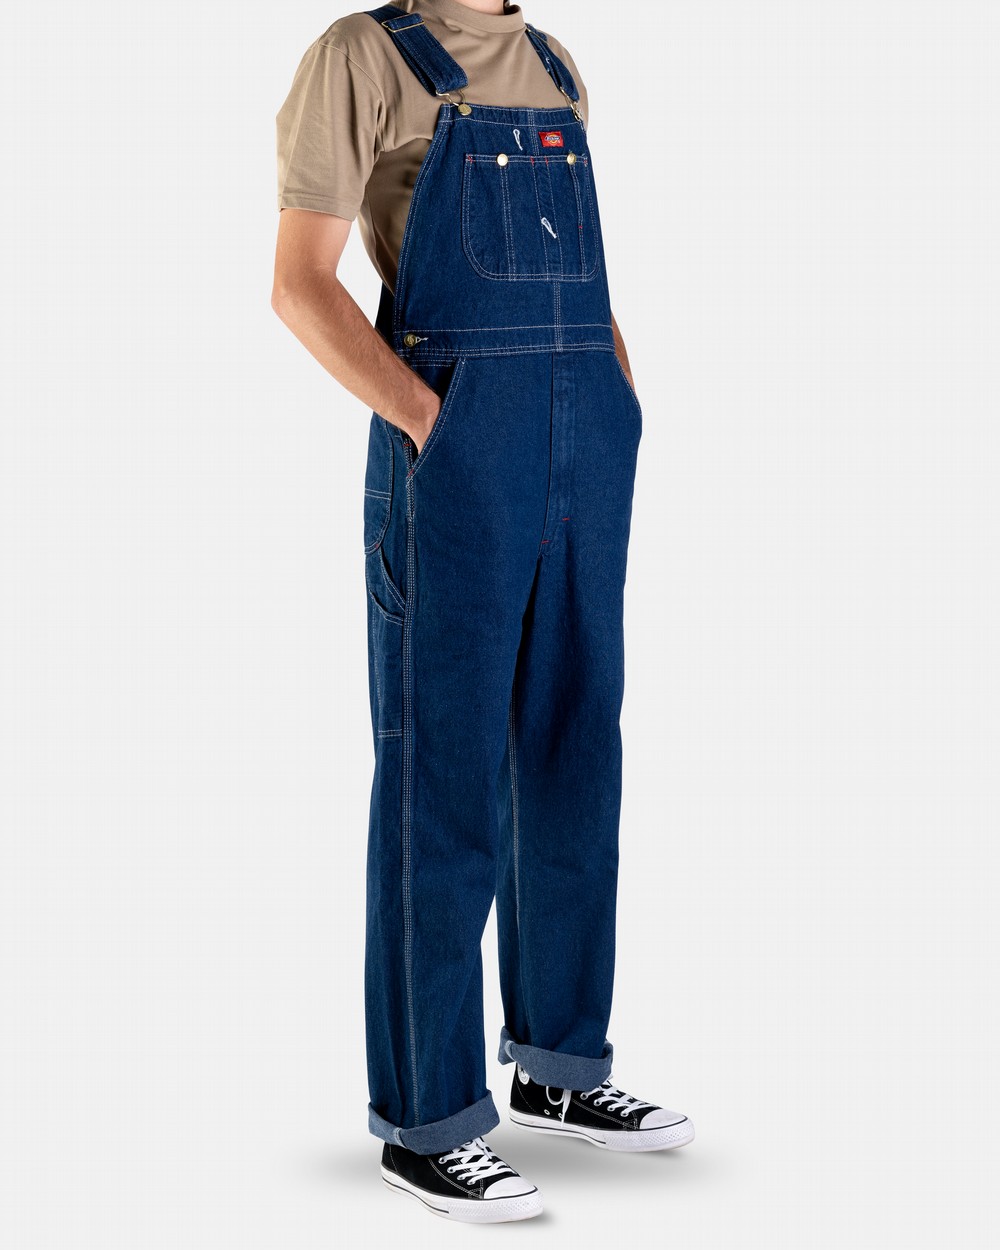 Womens Baggy WideLeg Overall Overalls  Old Navy